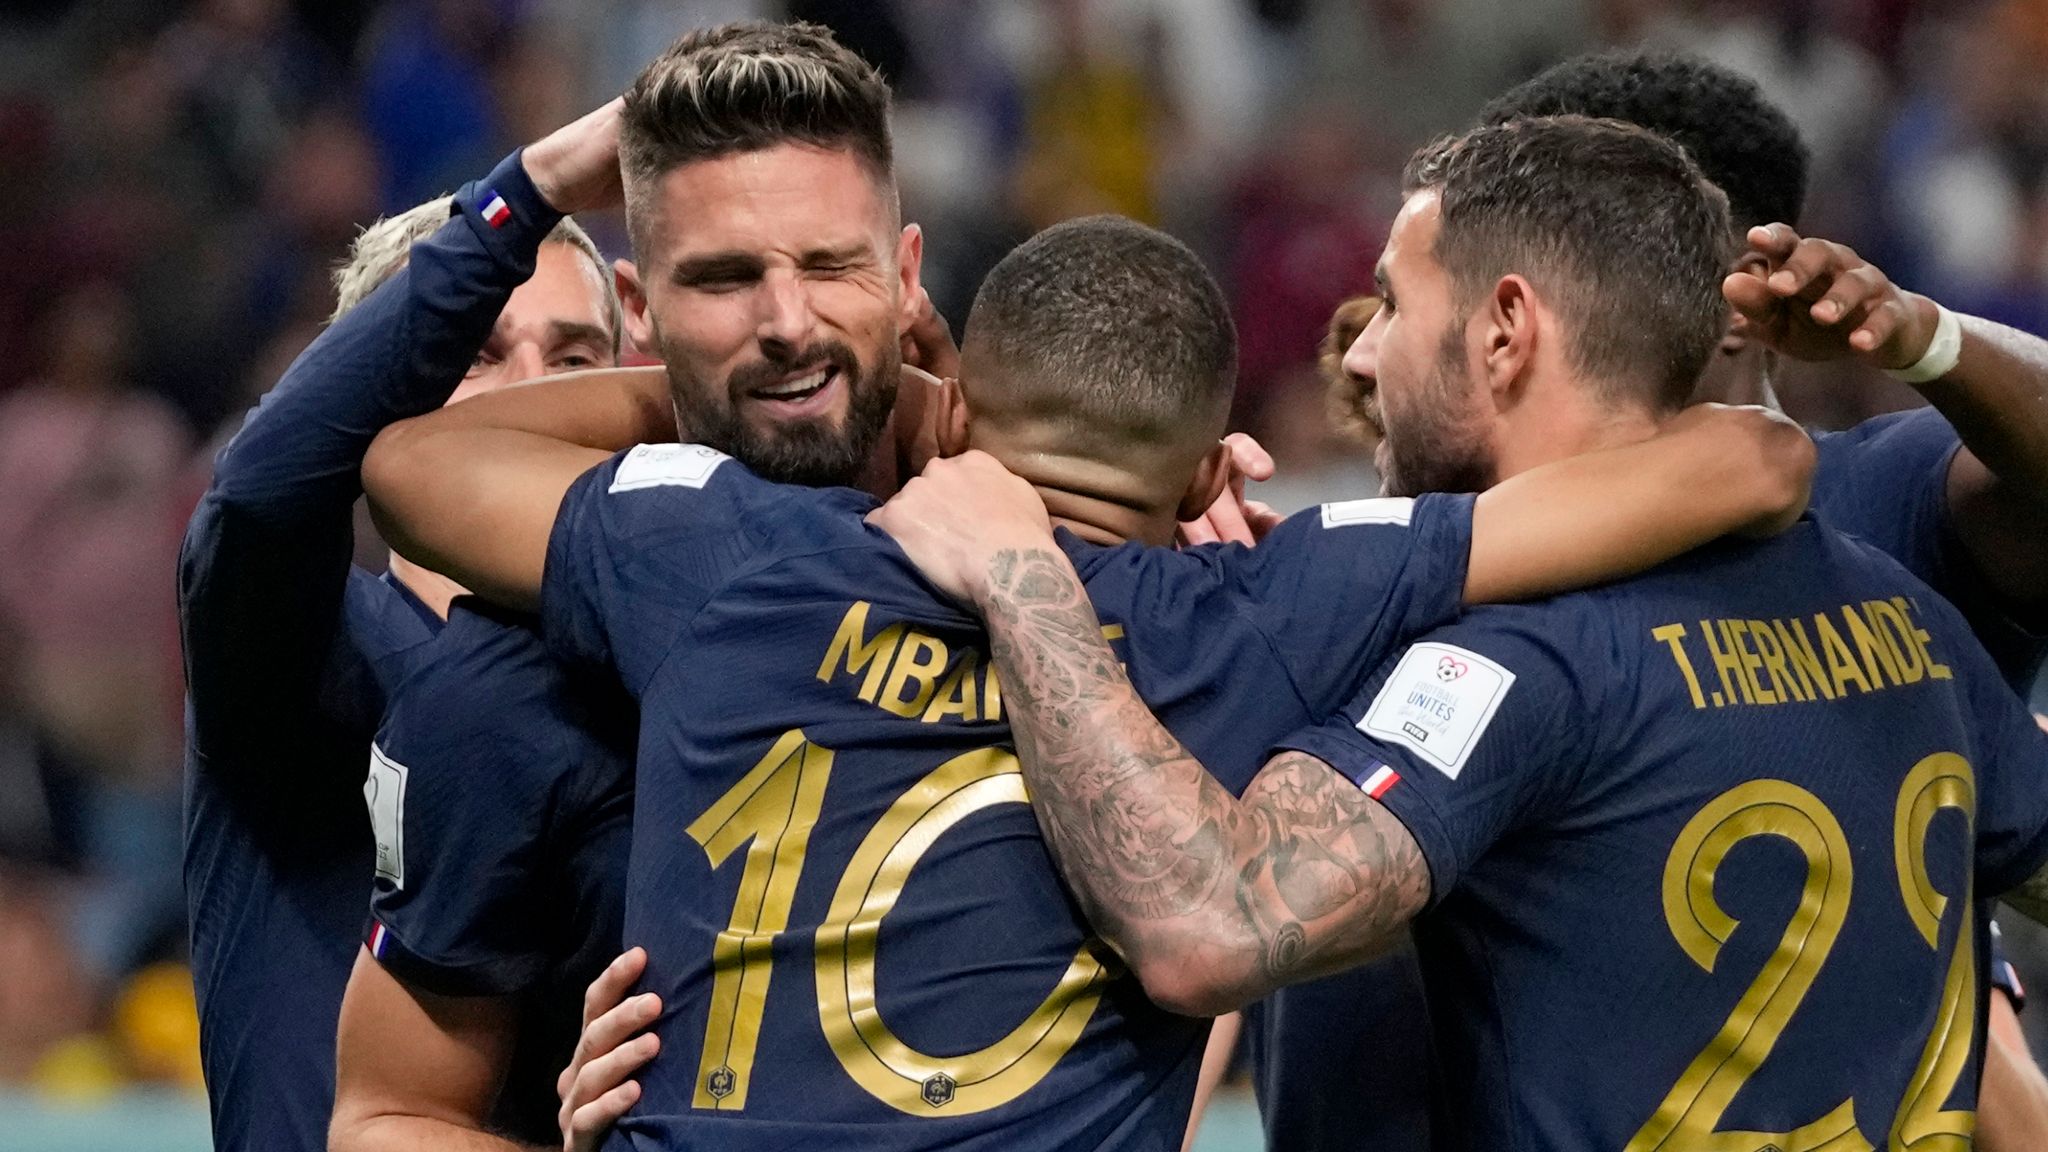 Oliver Giroud scores record-equalling goal as France defeats Australia